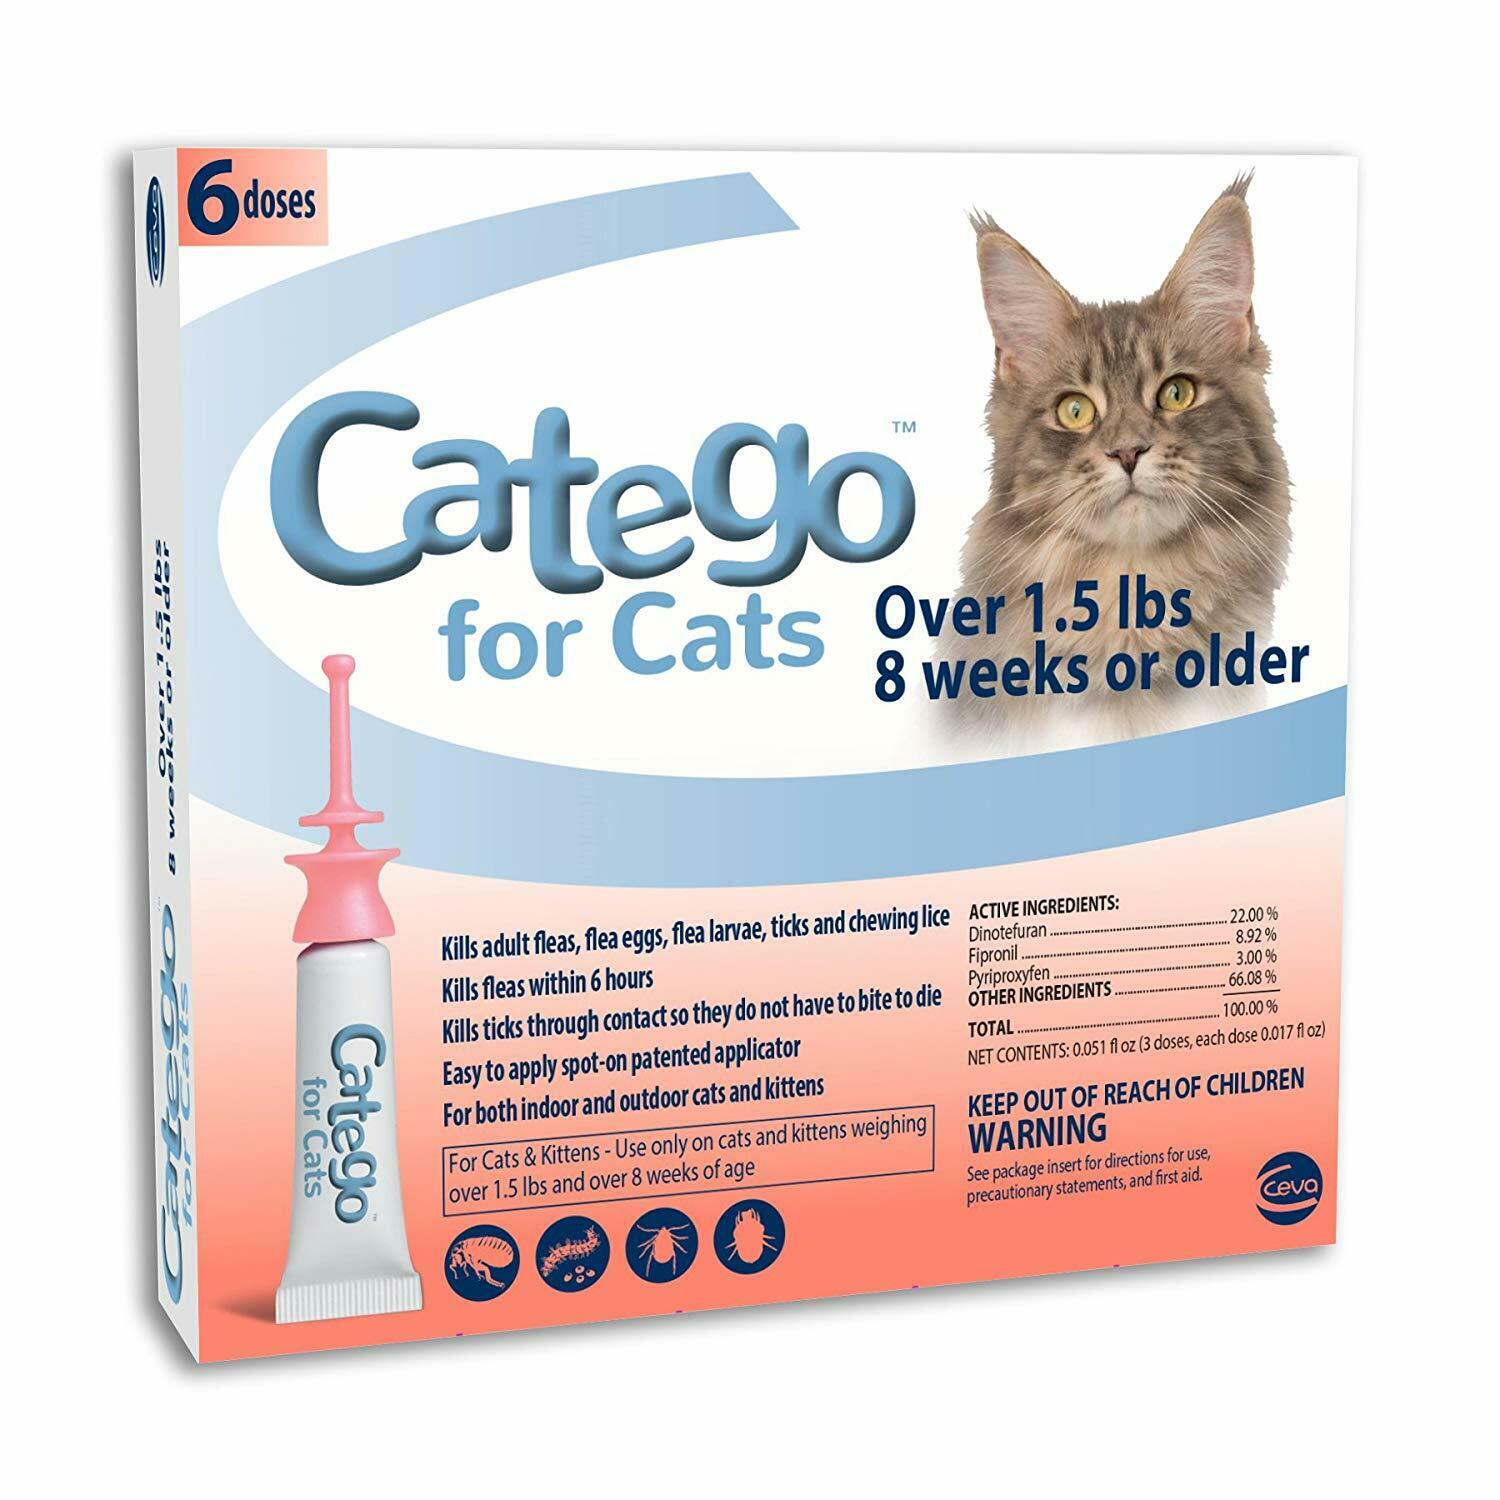 Catego Flea And Tick Control For Cats Over 1.5 Lb/8 Weeks 6 Doses